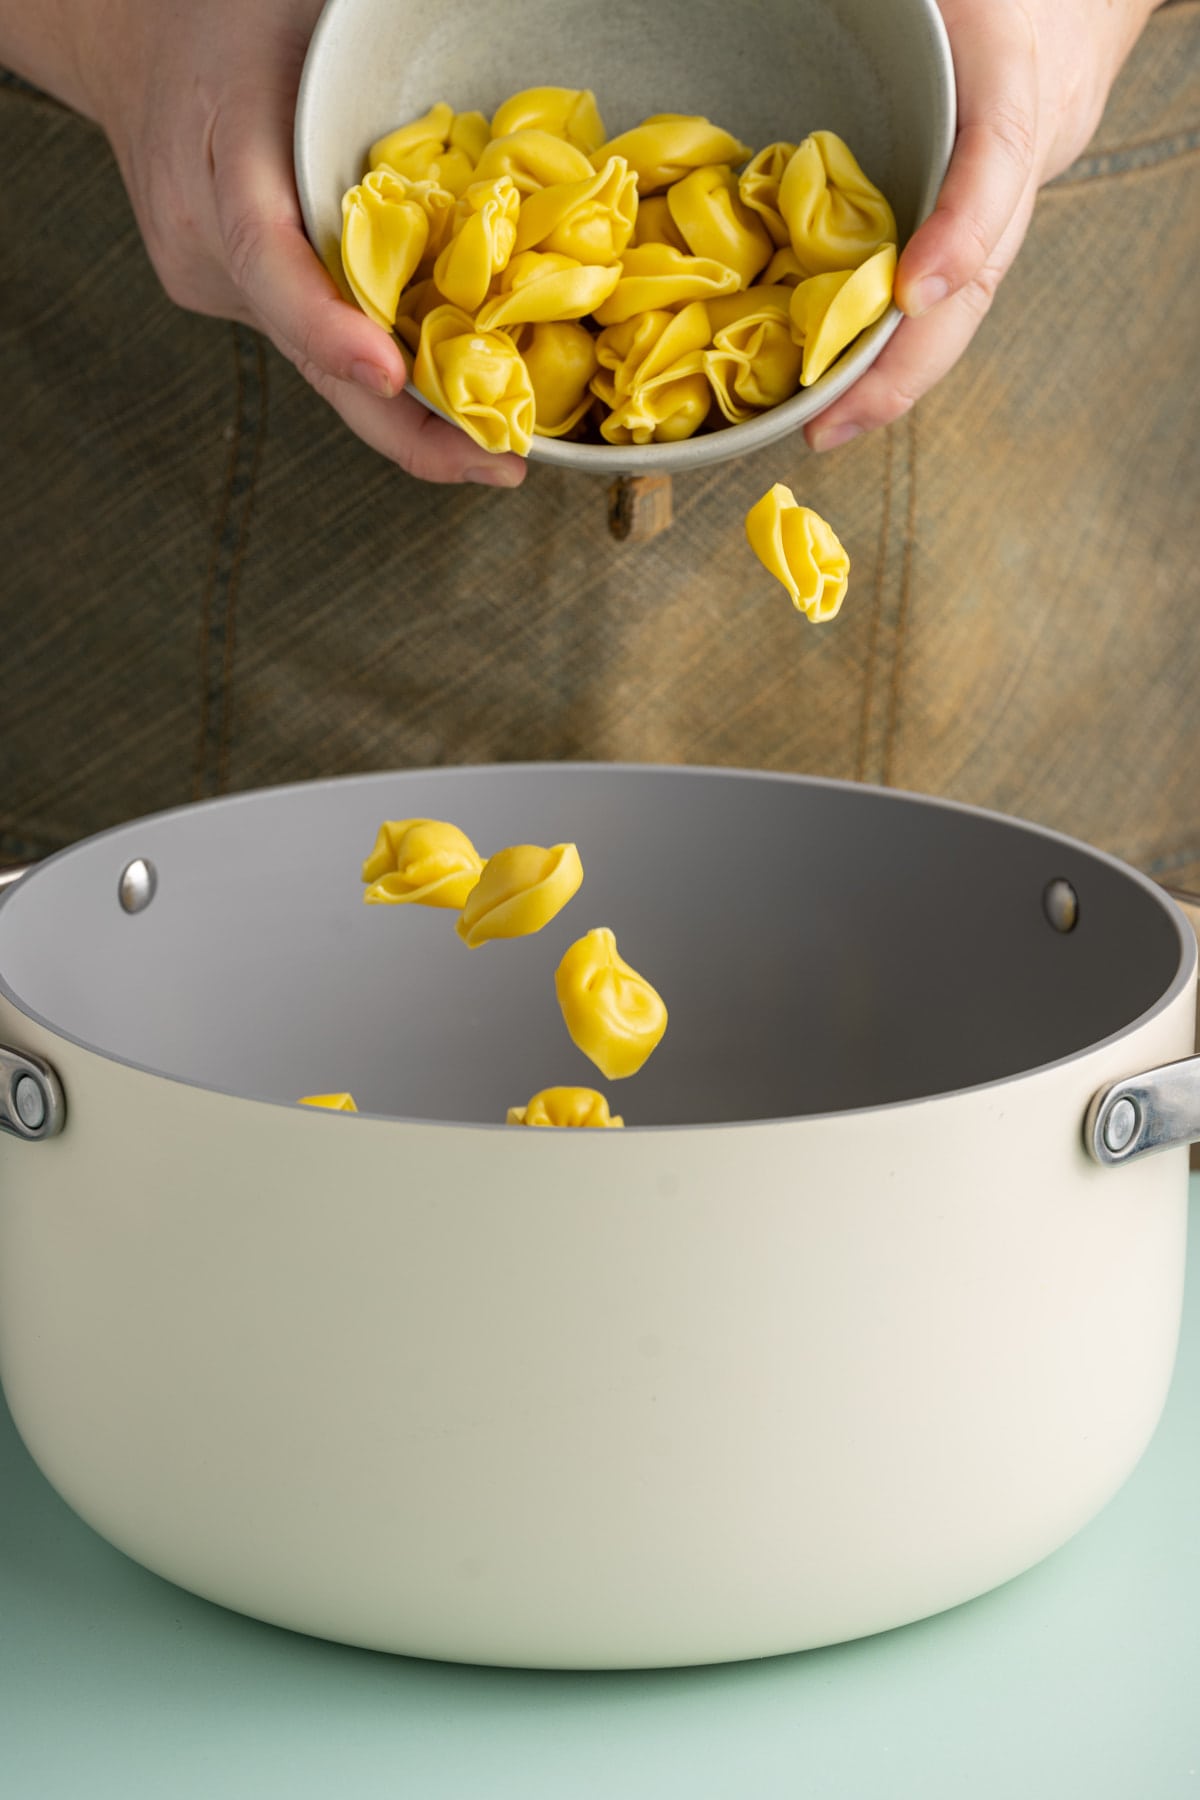 Boiling tortellini in a large pot